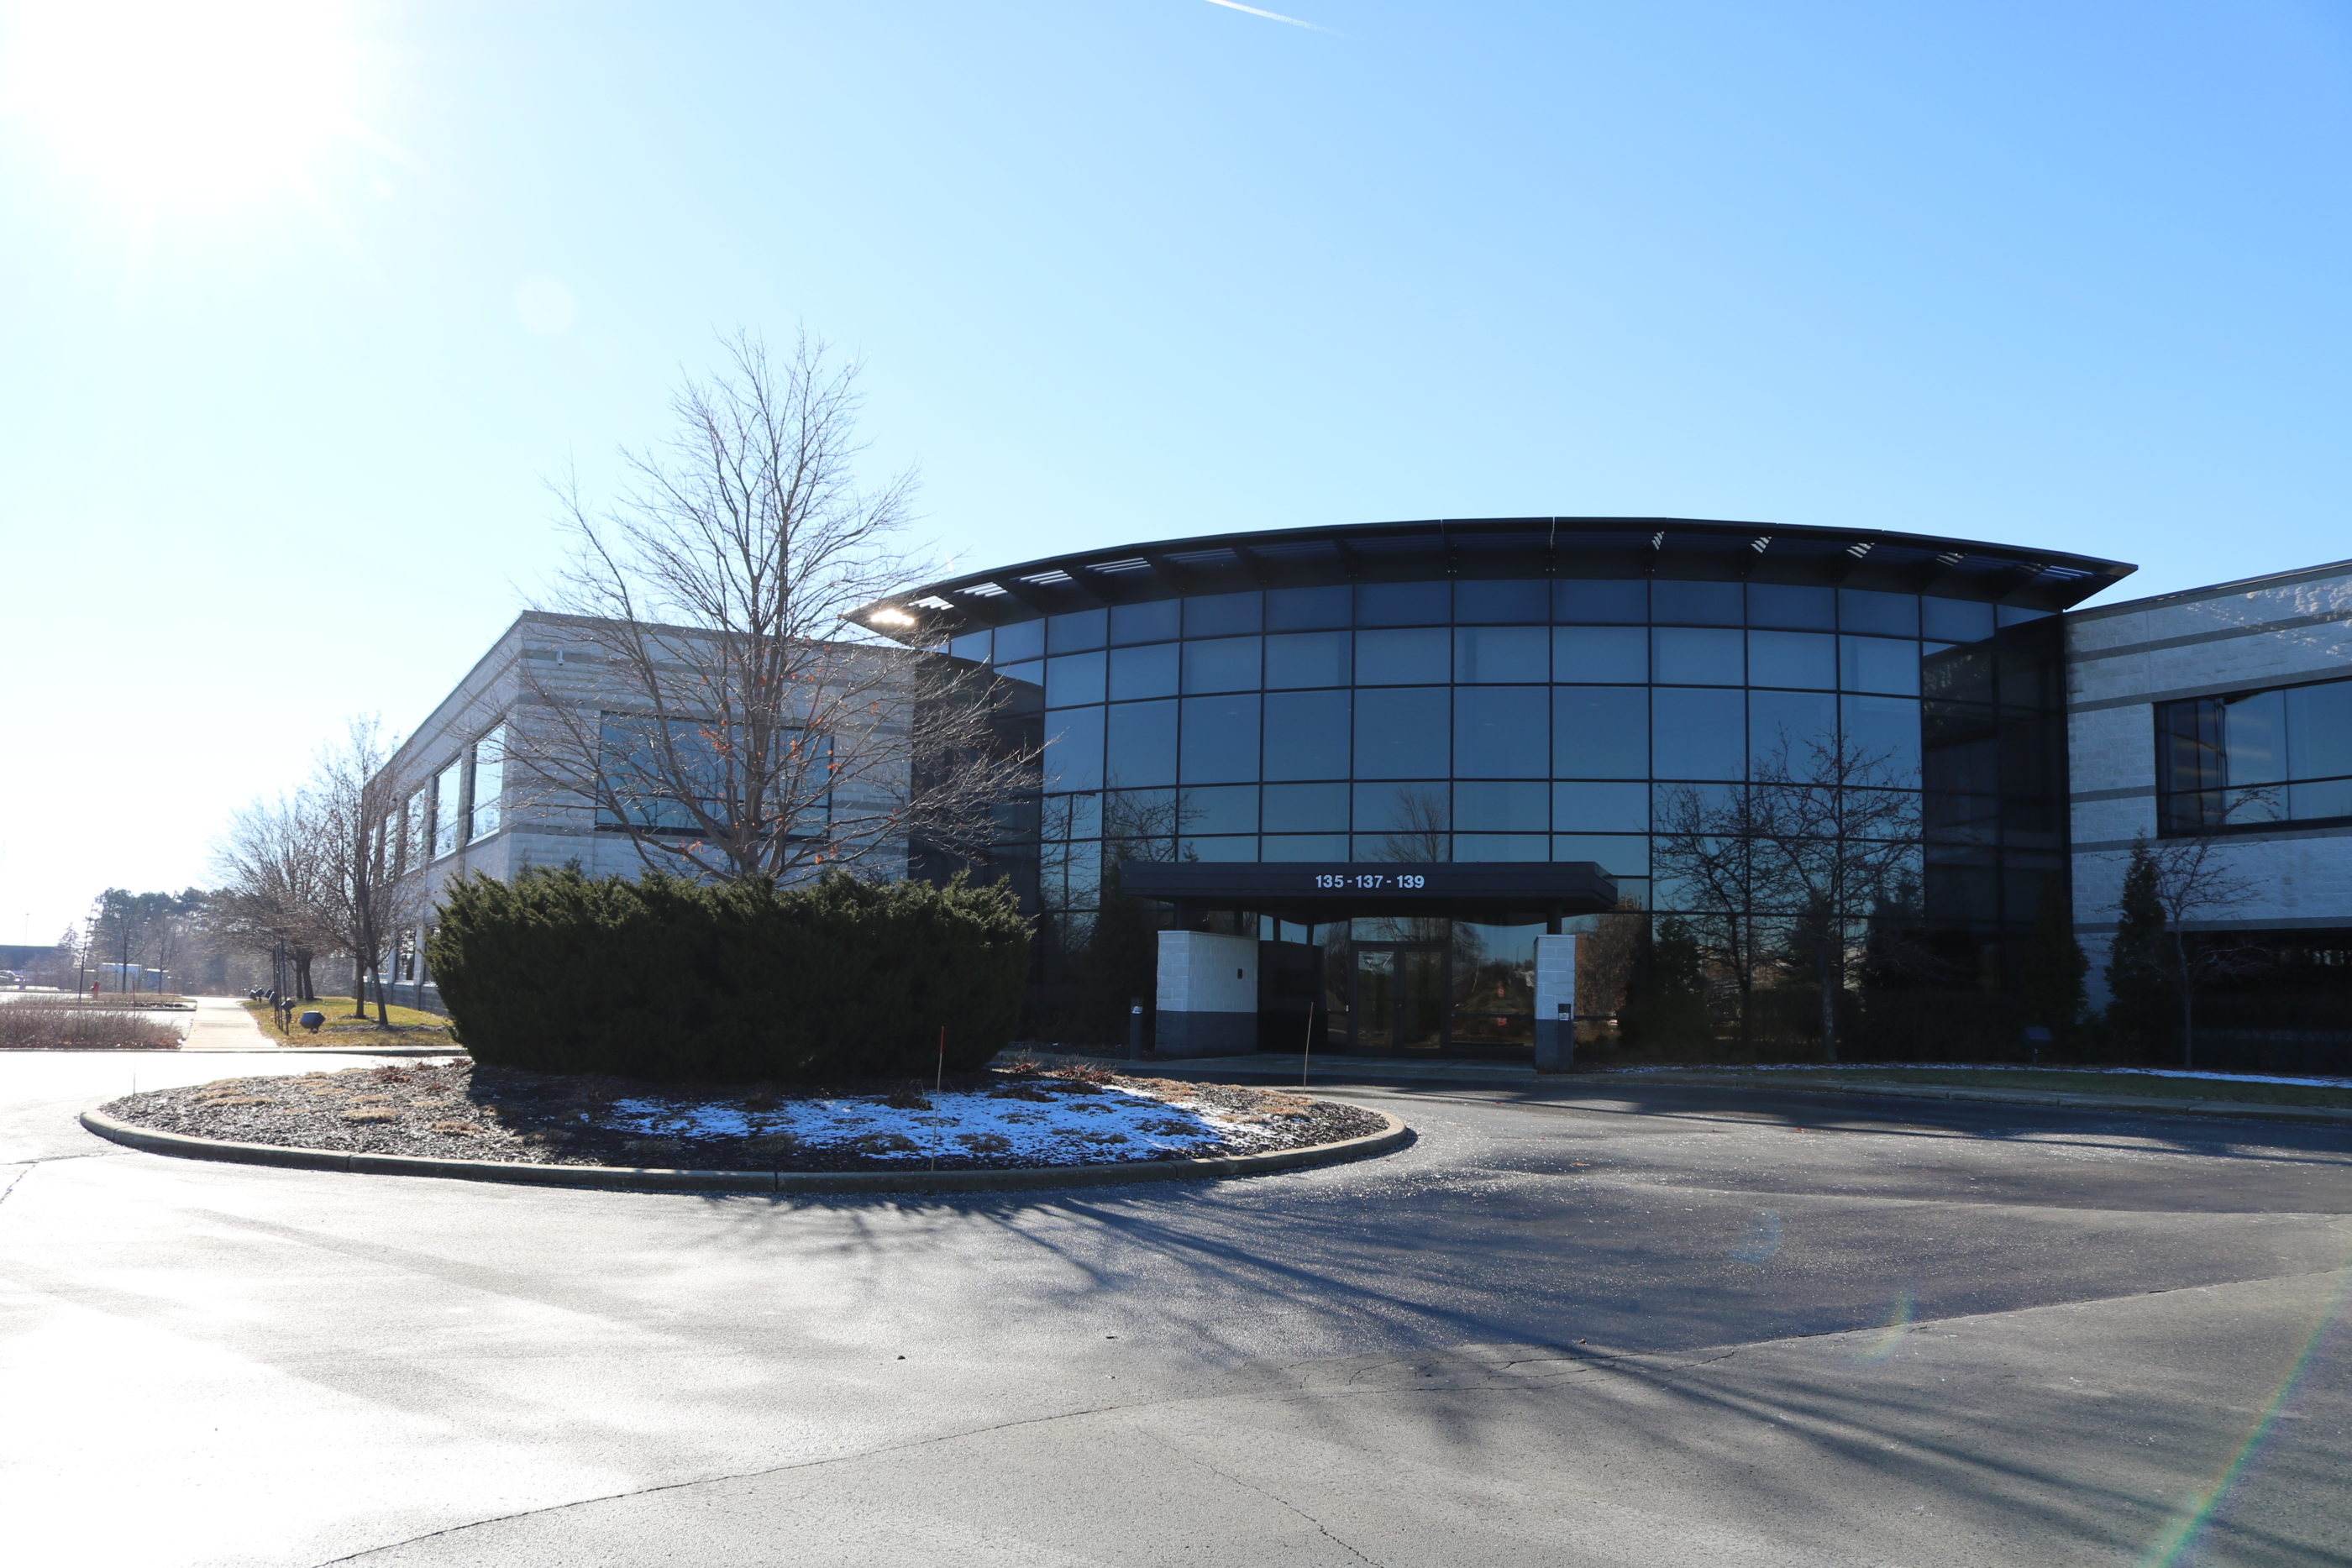 The new Astronautics facility in Oak Creek, Wisconsin (pictured), will allow for the consolidation of the company’s corporate headquarters and manufacturing facilities into one location. Astronautics Corp Photo